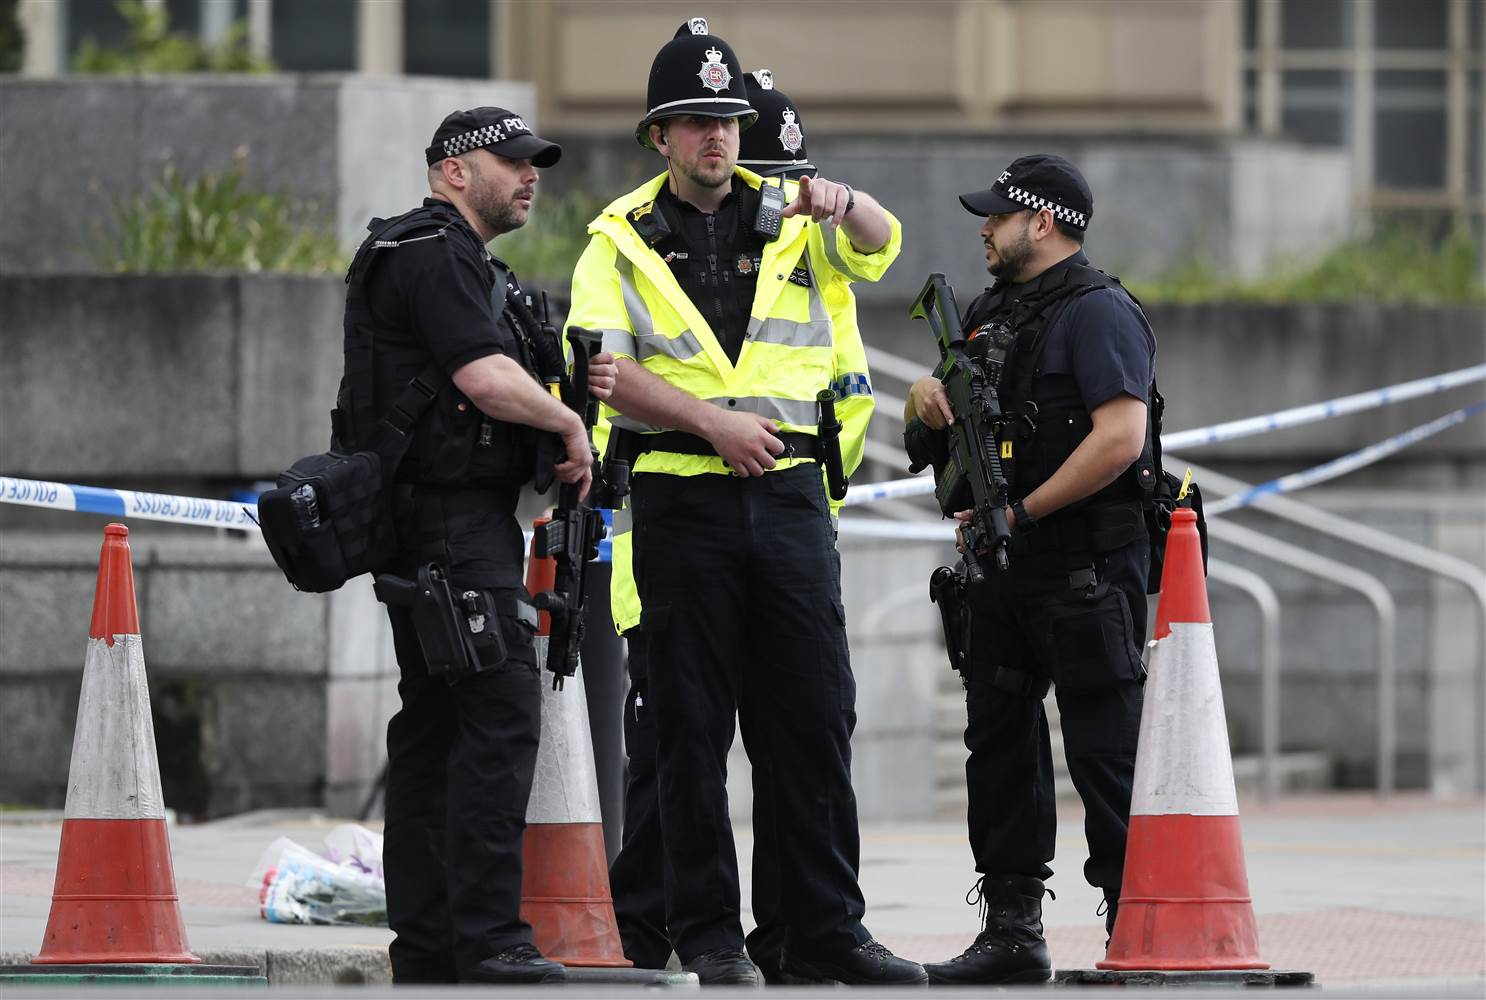 Woman arrested in connection with Manchester attack after police raid flats